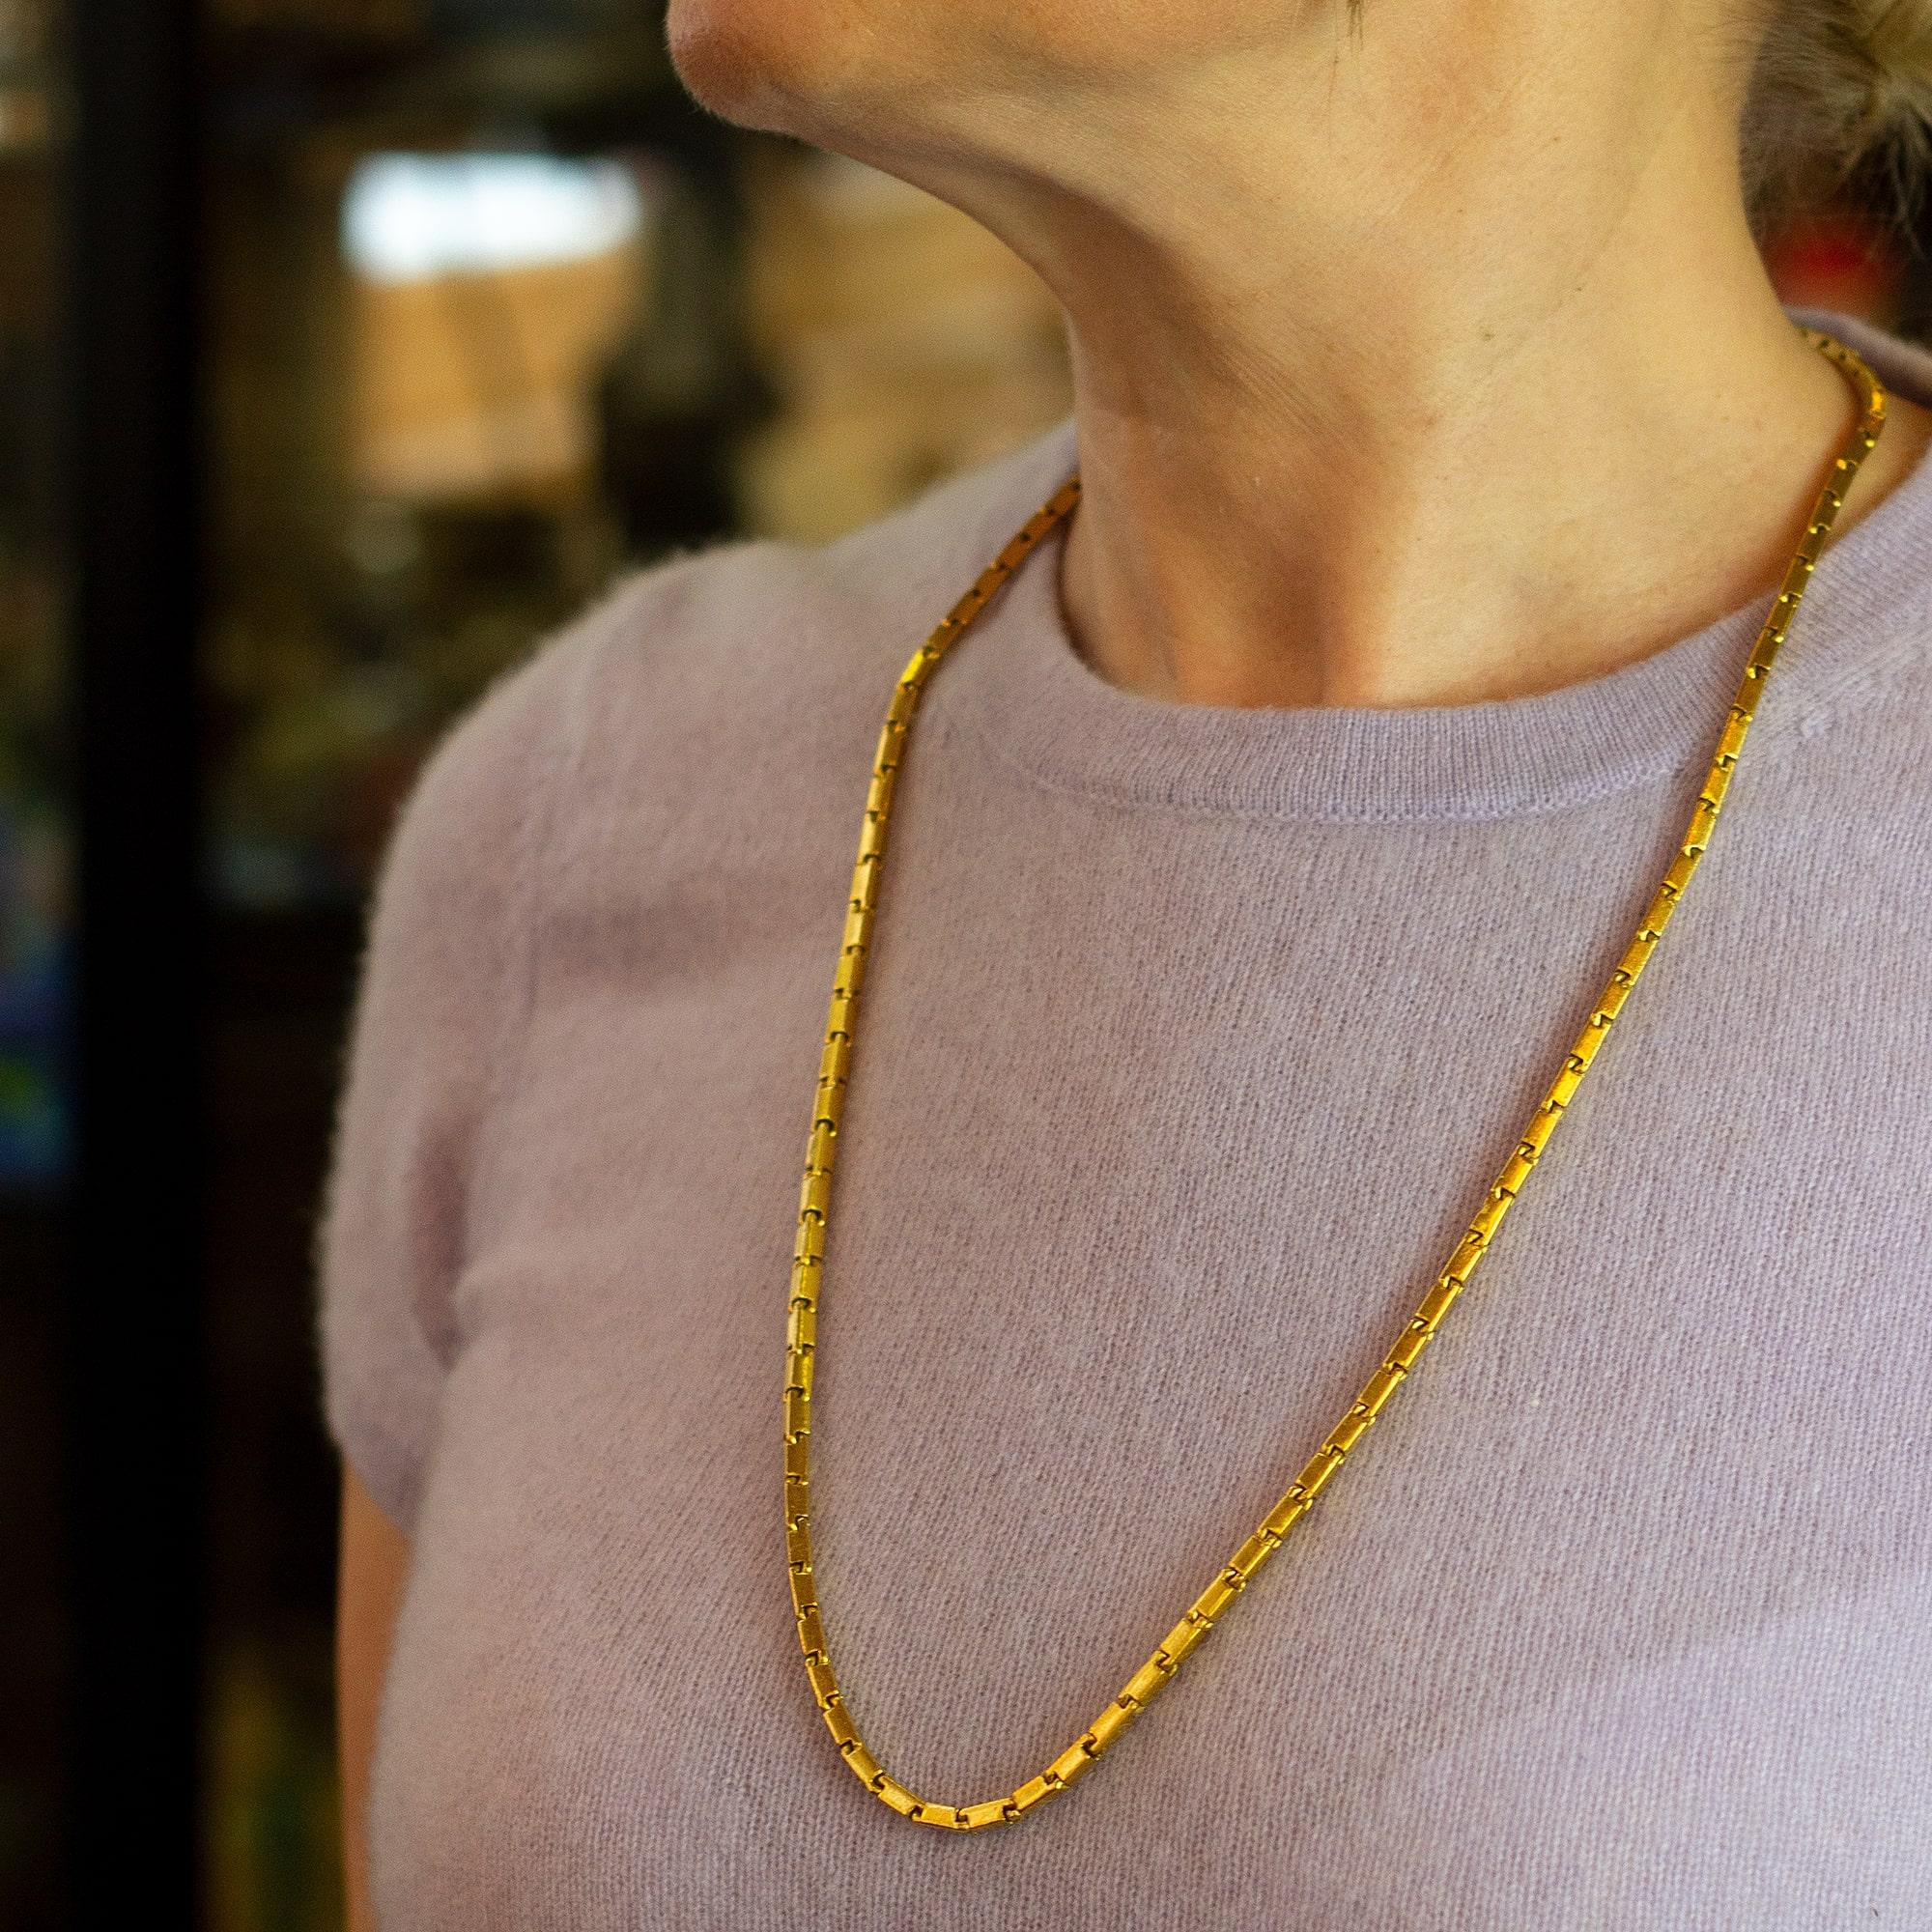 This substantial pure gold necklace likely originates from Thailand or a neighbouring country and is known as a 'Baht' necklace. The links are known as 'bar links' and are rectangular prisms connected to one another at their narrowest point. The